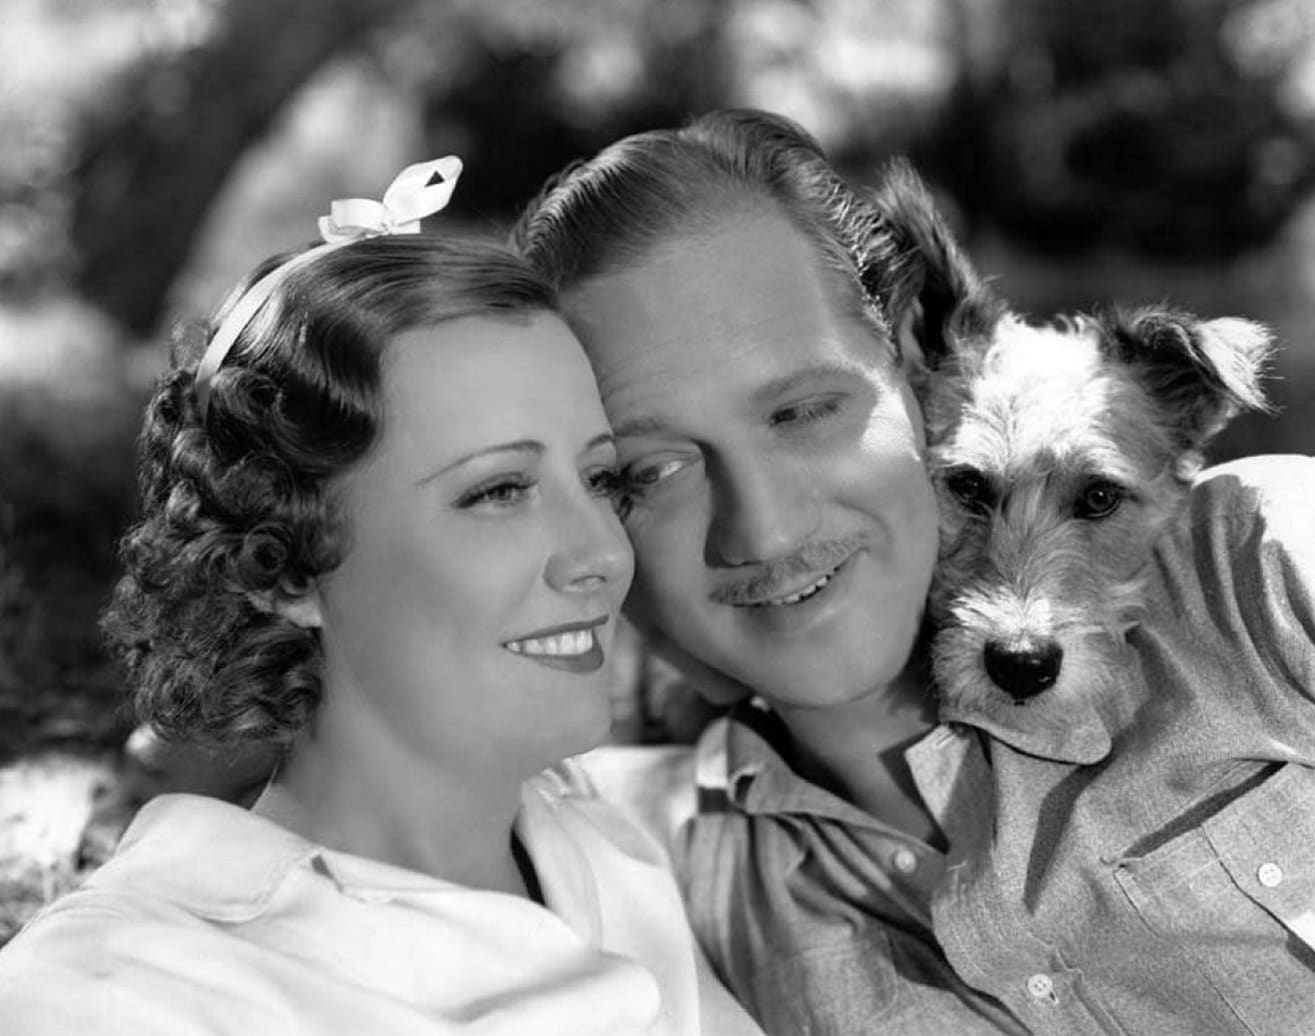 Irene Dunne, Melvyn Douglas and Corky the dog